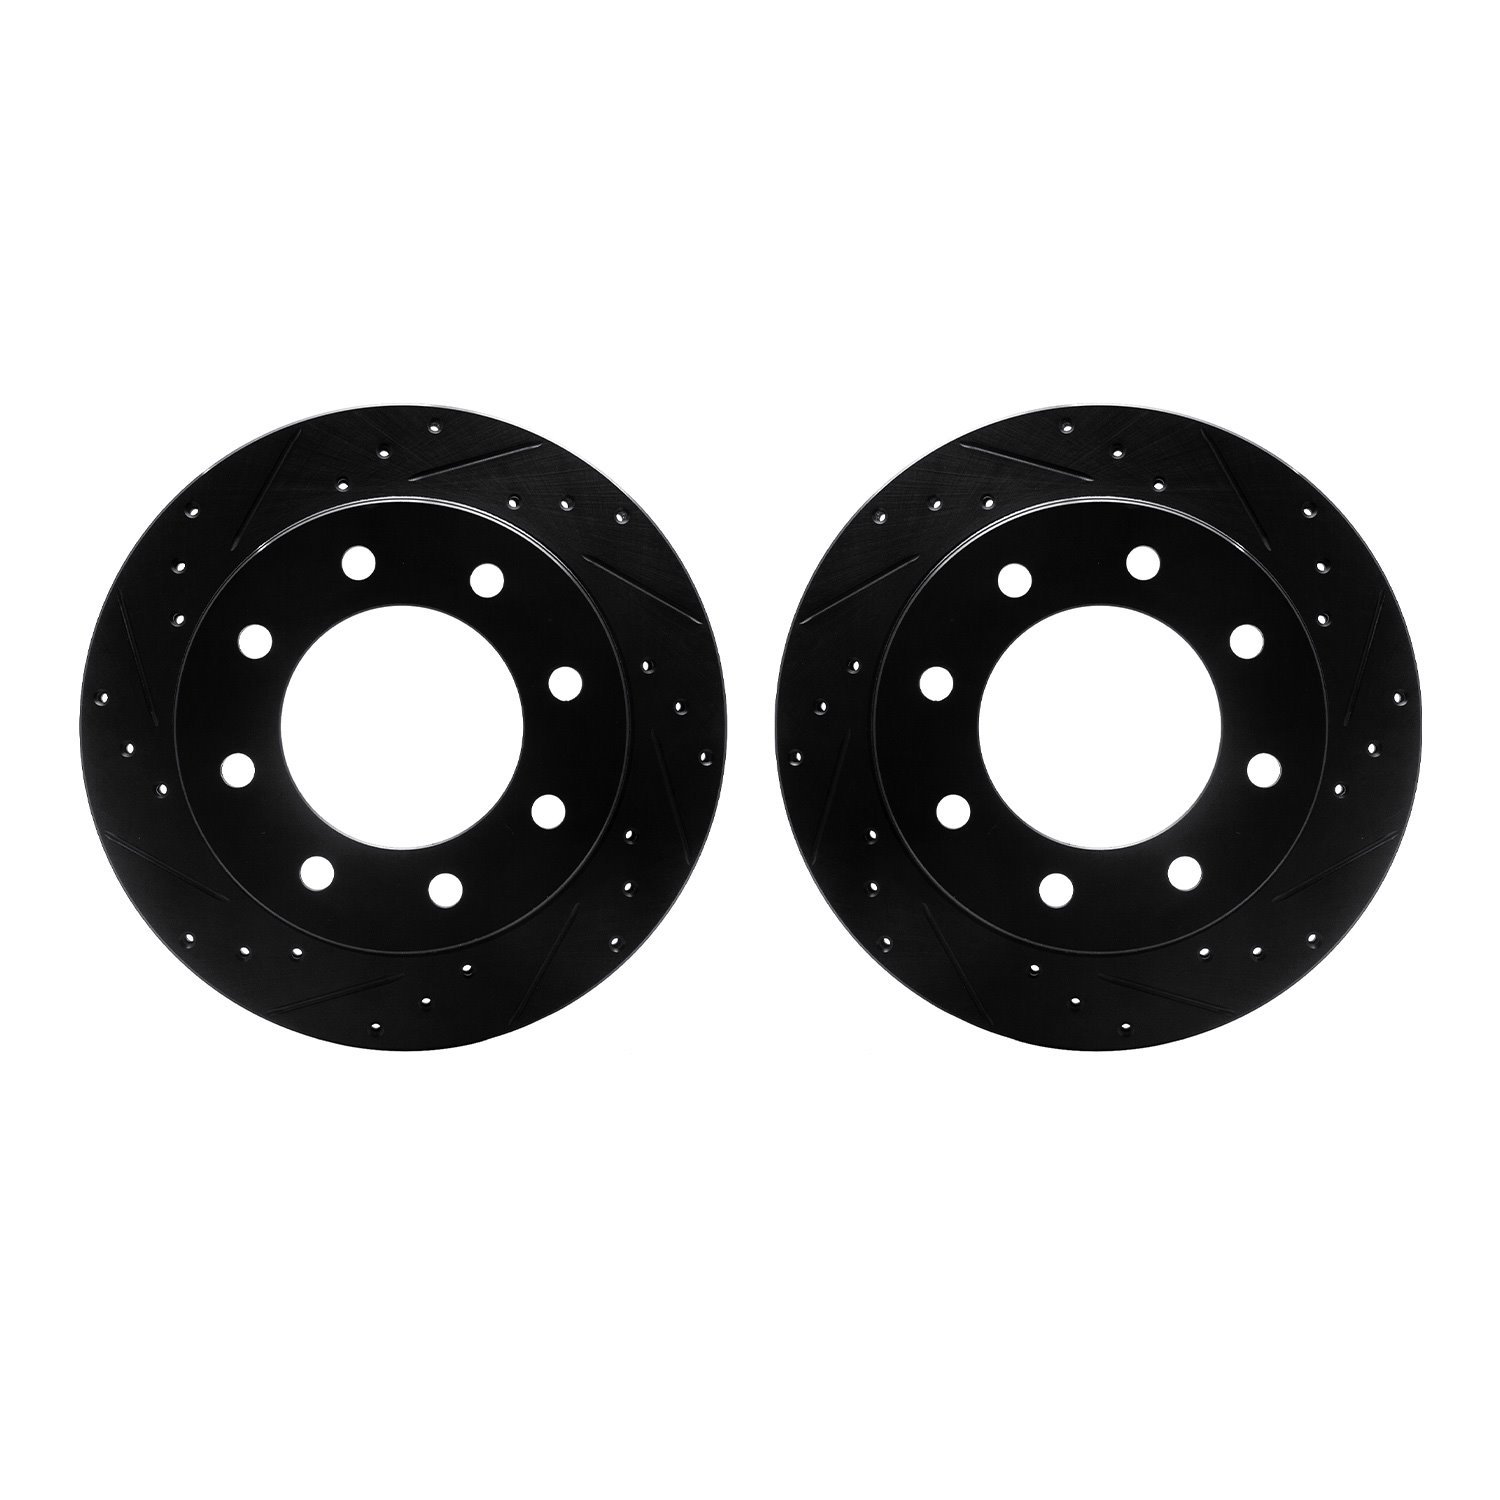 8002-48058 Drilled/Slotted Brake Rotors [Black], Fits Select GM, Position: Rear